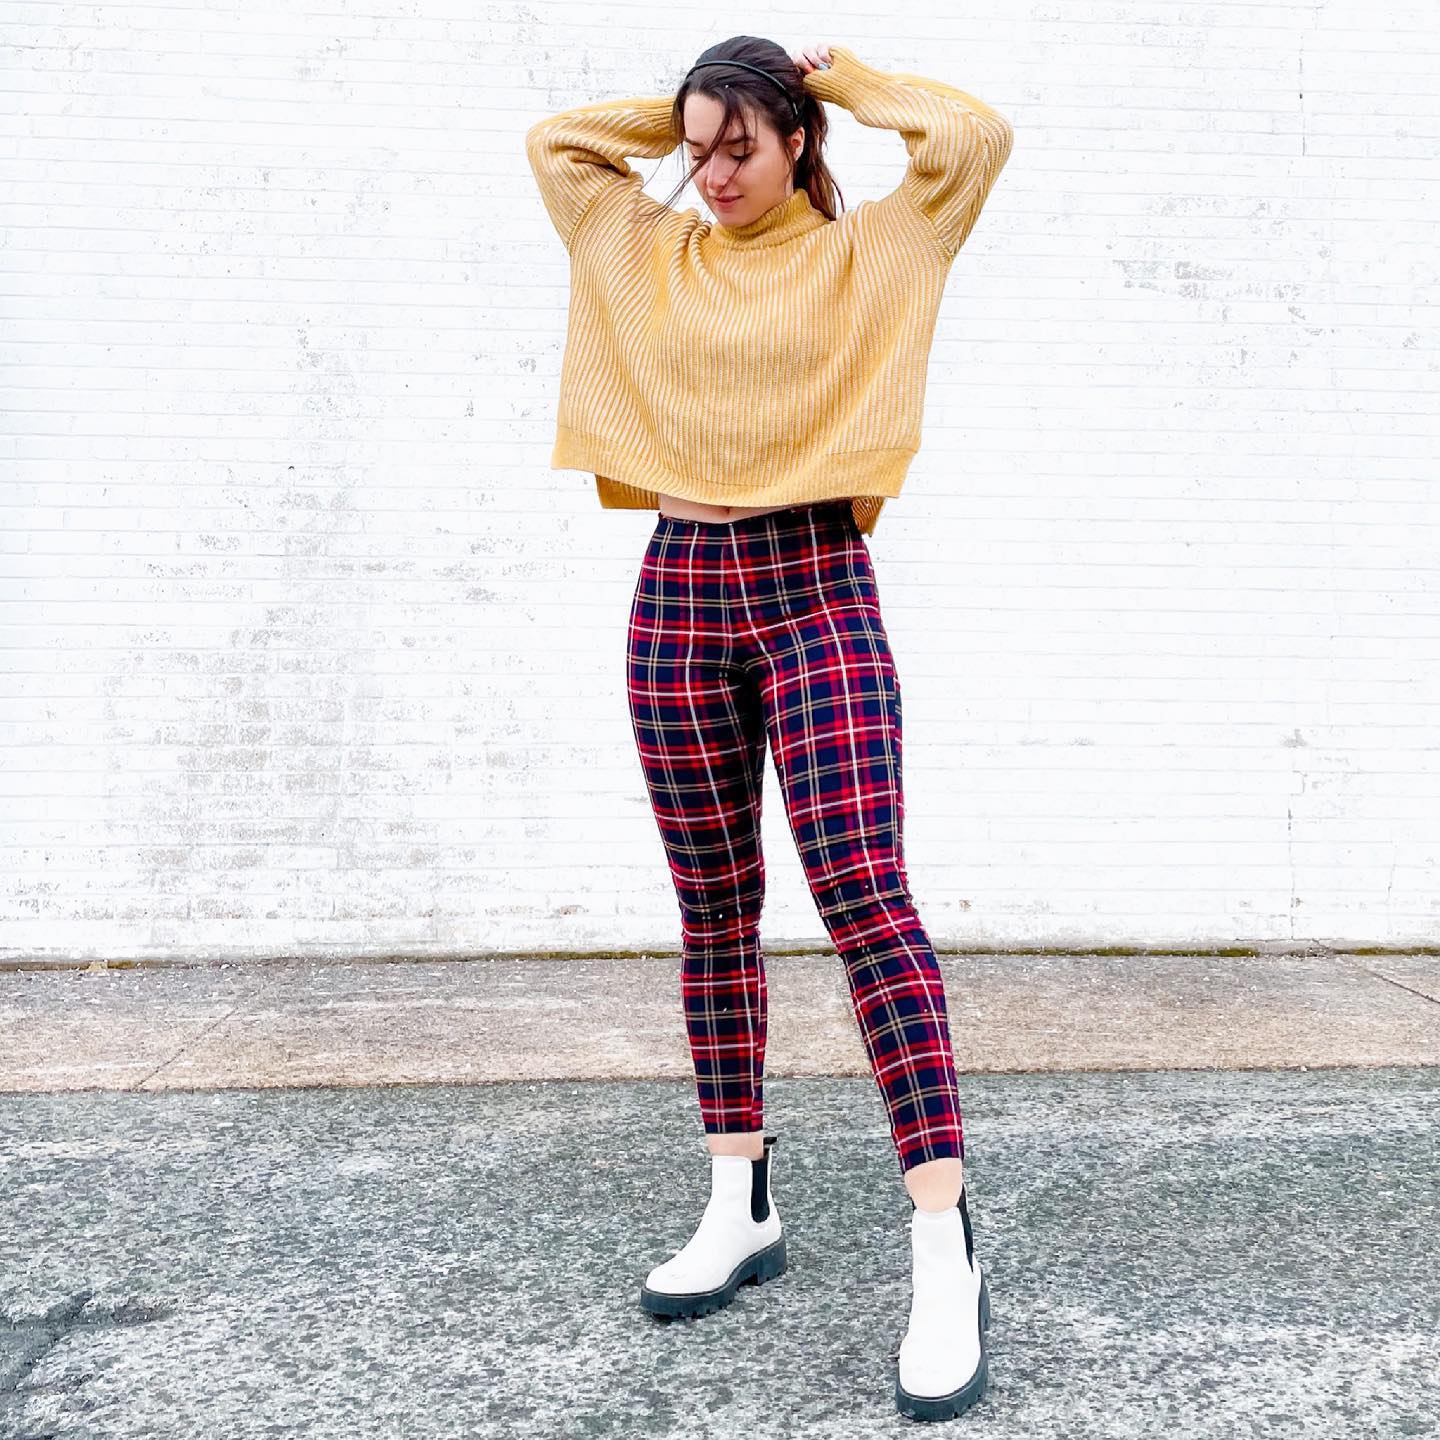 Pairing plaid pants with a turtleneck